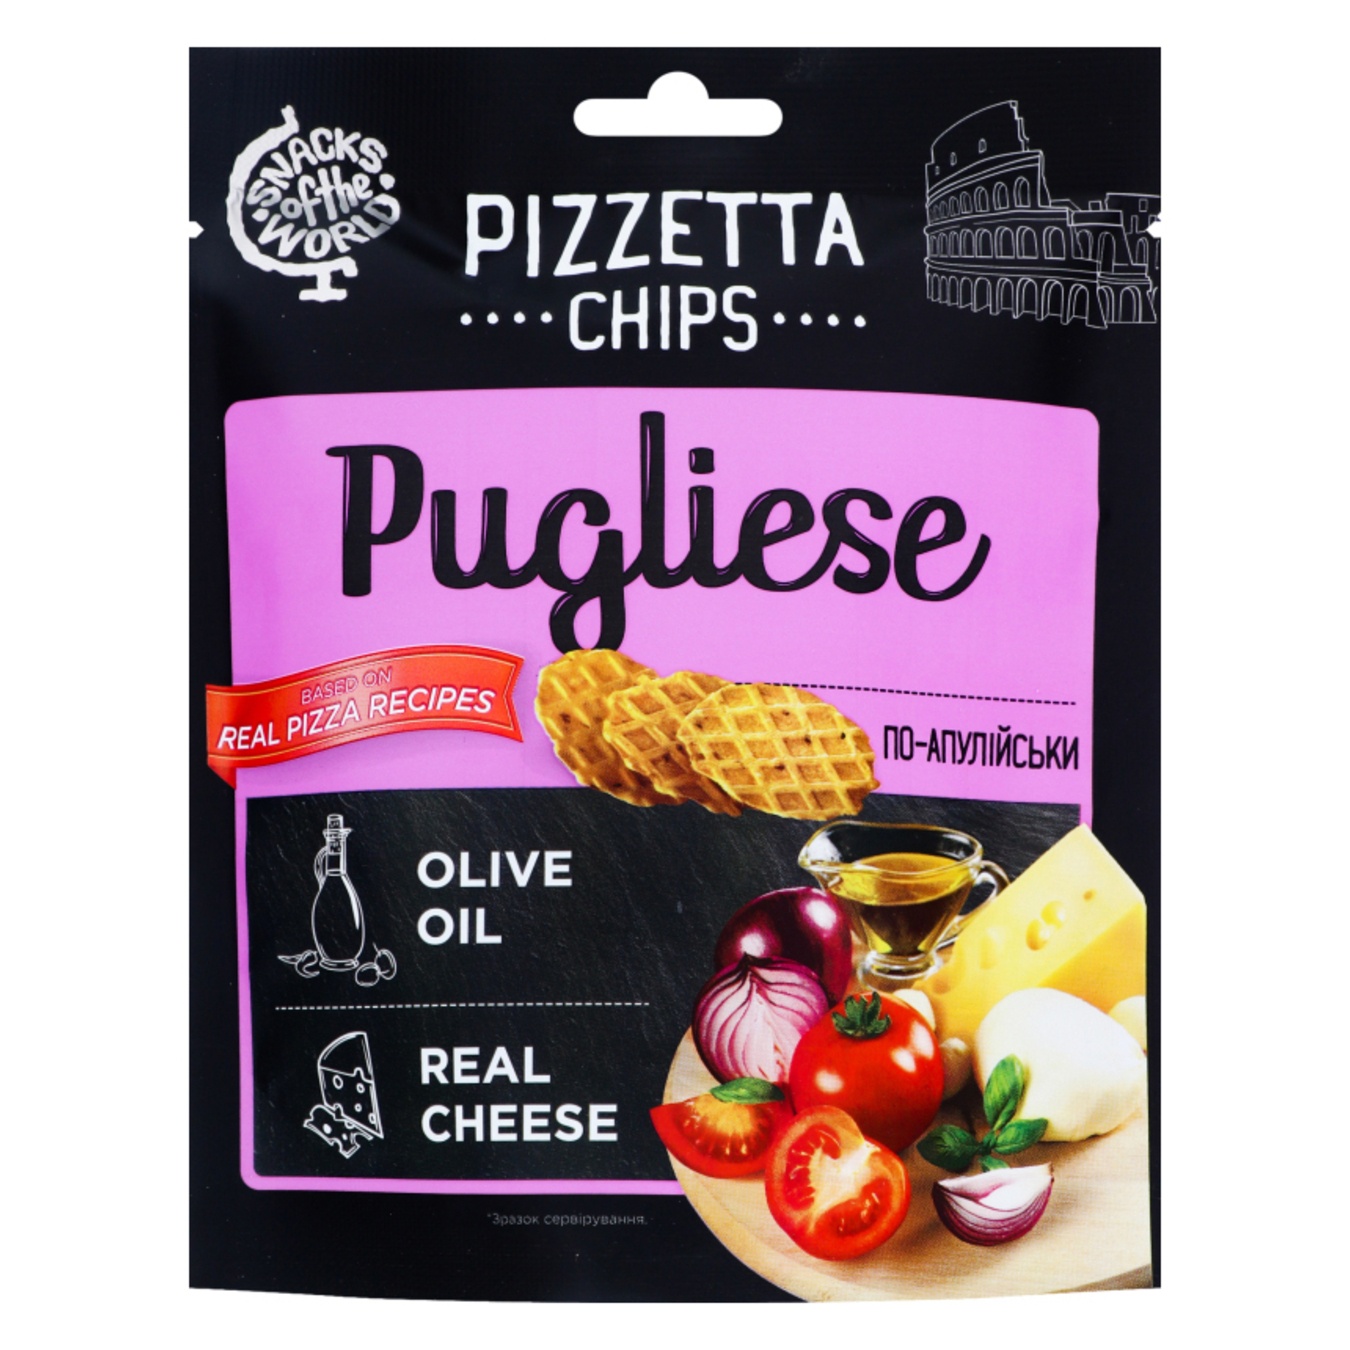 Snack Snacks of the World Pizzetta Chips Apulian style 70g 2